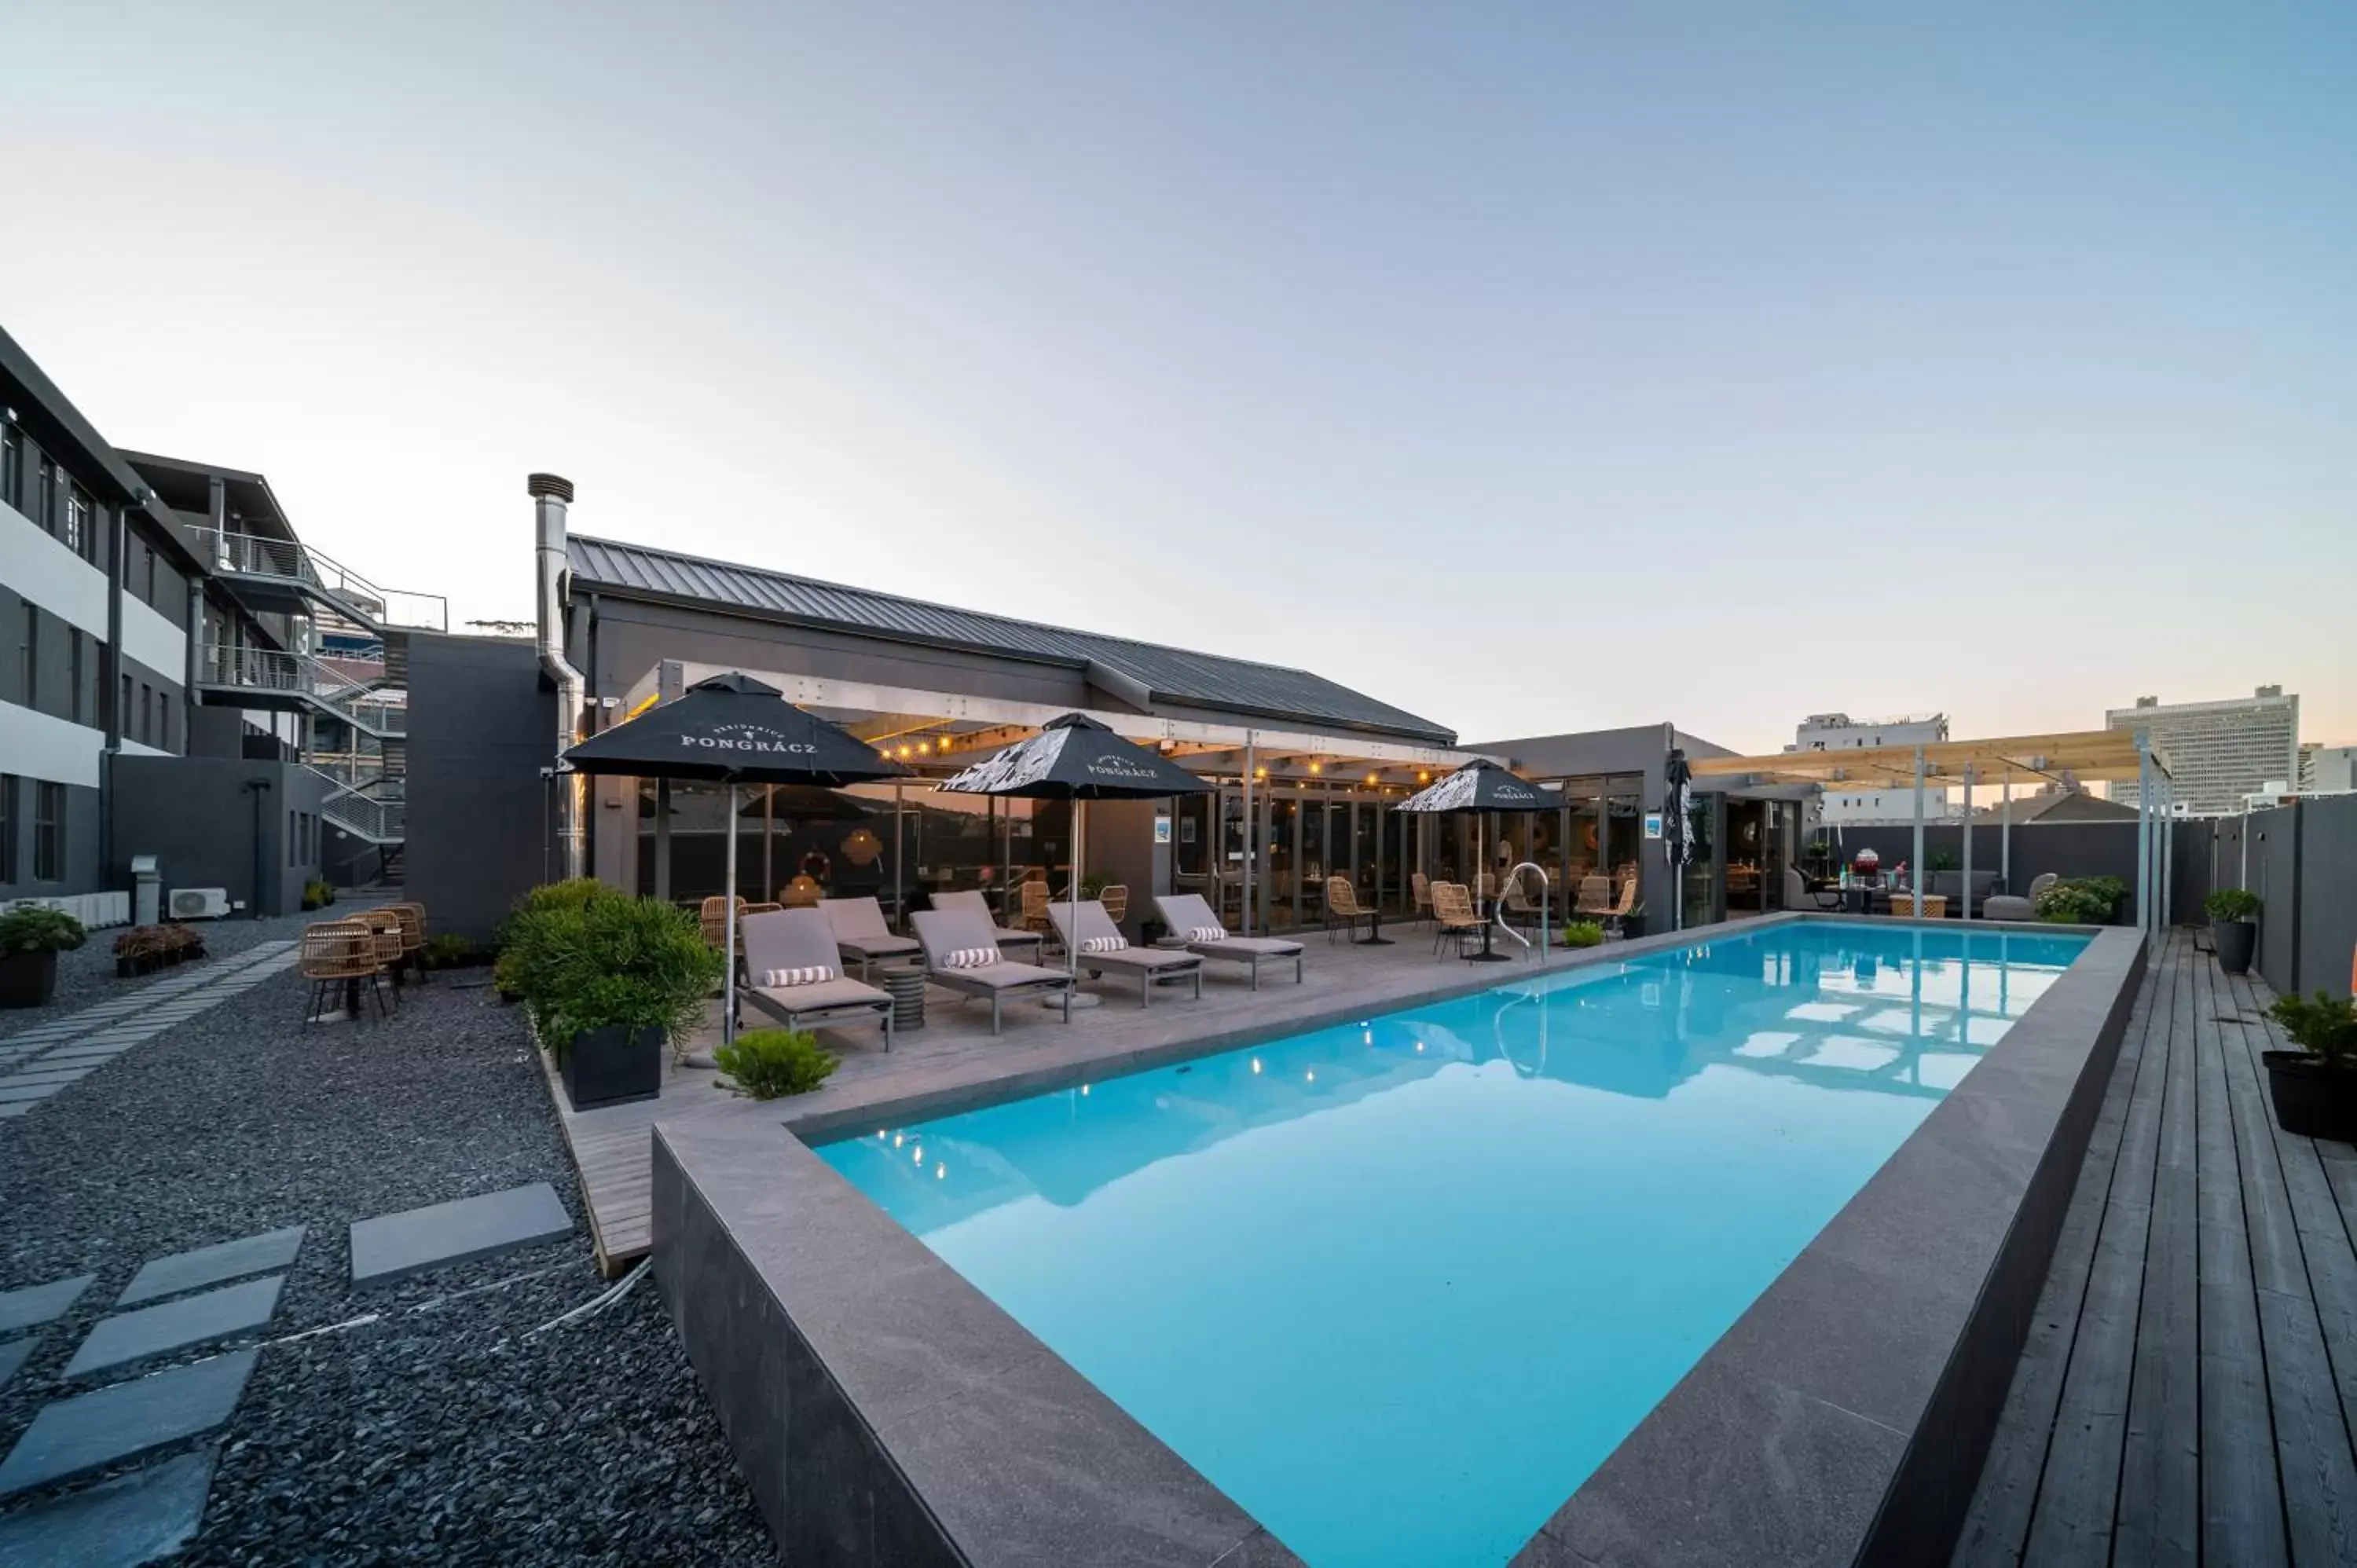 Property building, Swimming Pool in Kloof Street Hotel - Lion Roars Hotels & Lodges